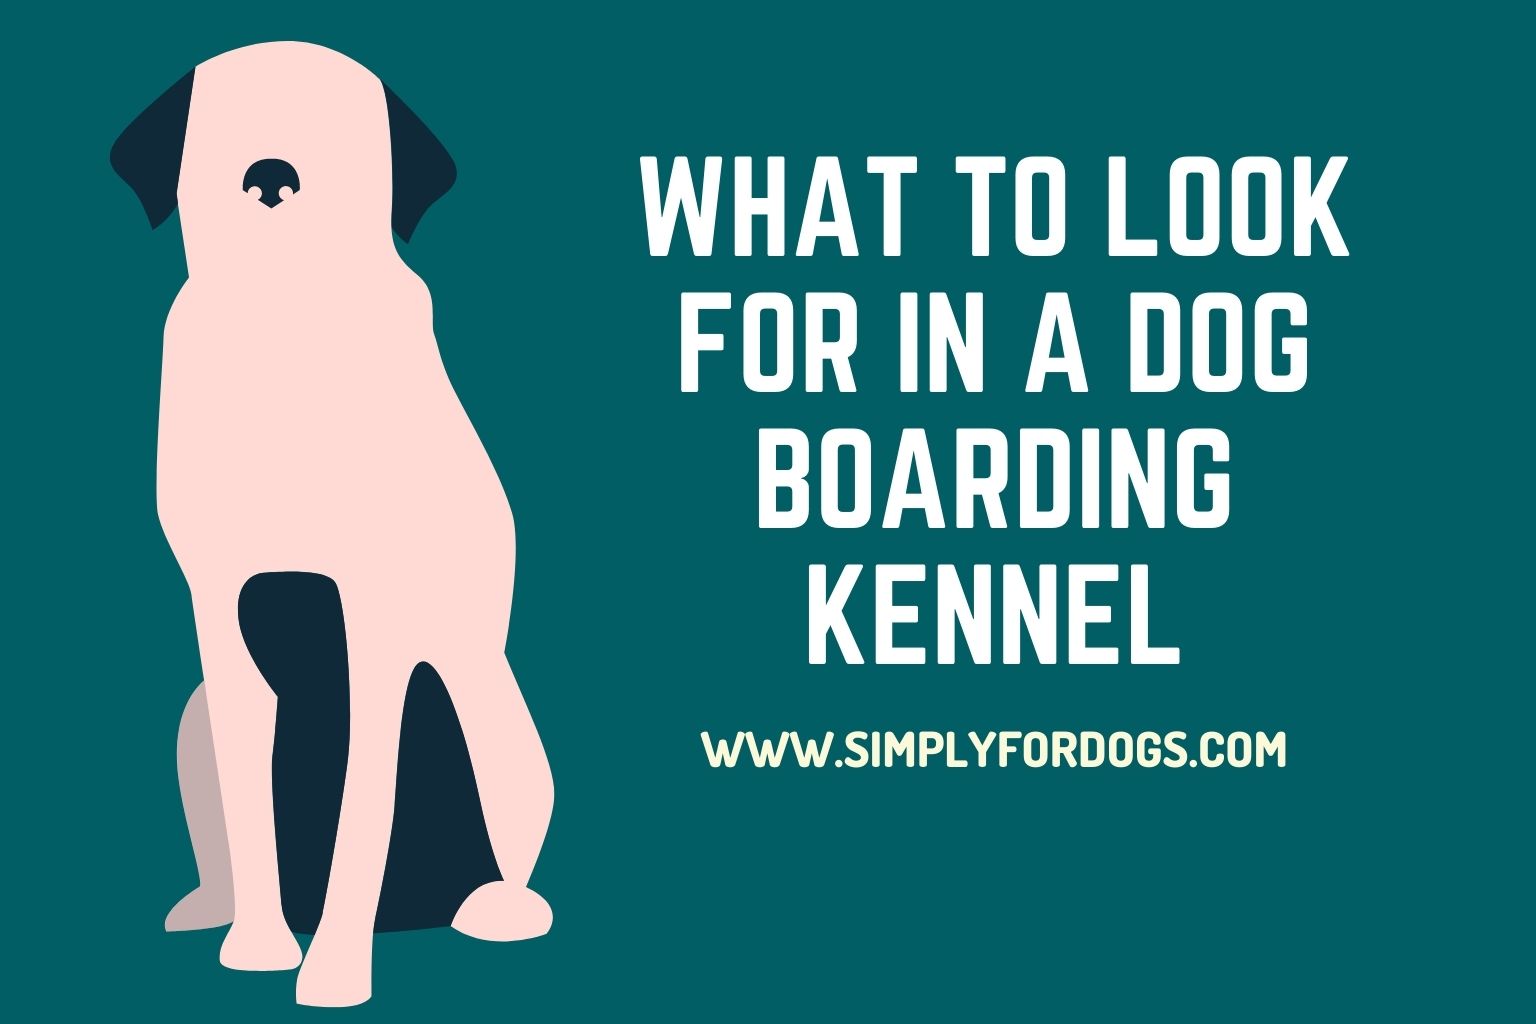 What to Look for in a Dog Boarding Kennel